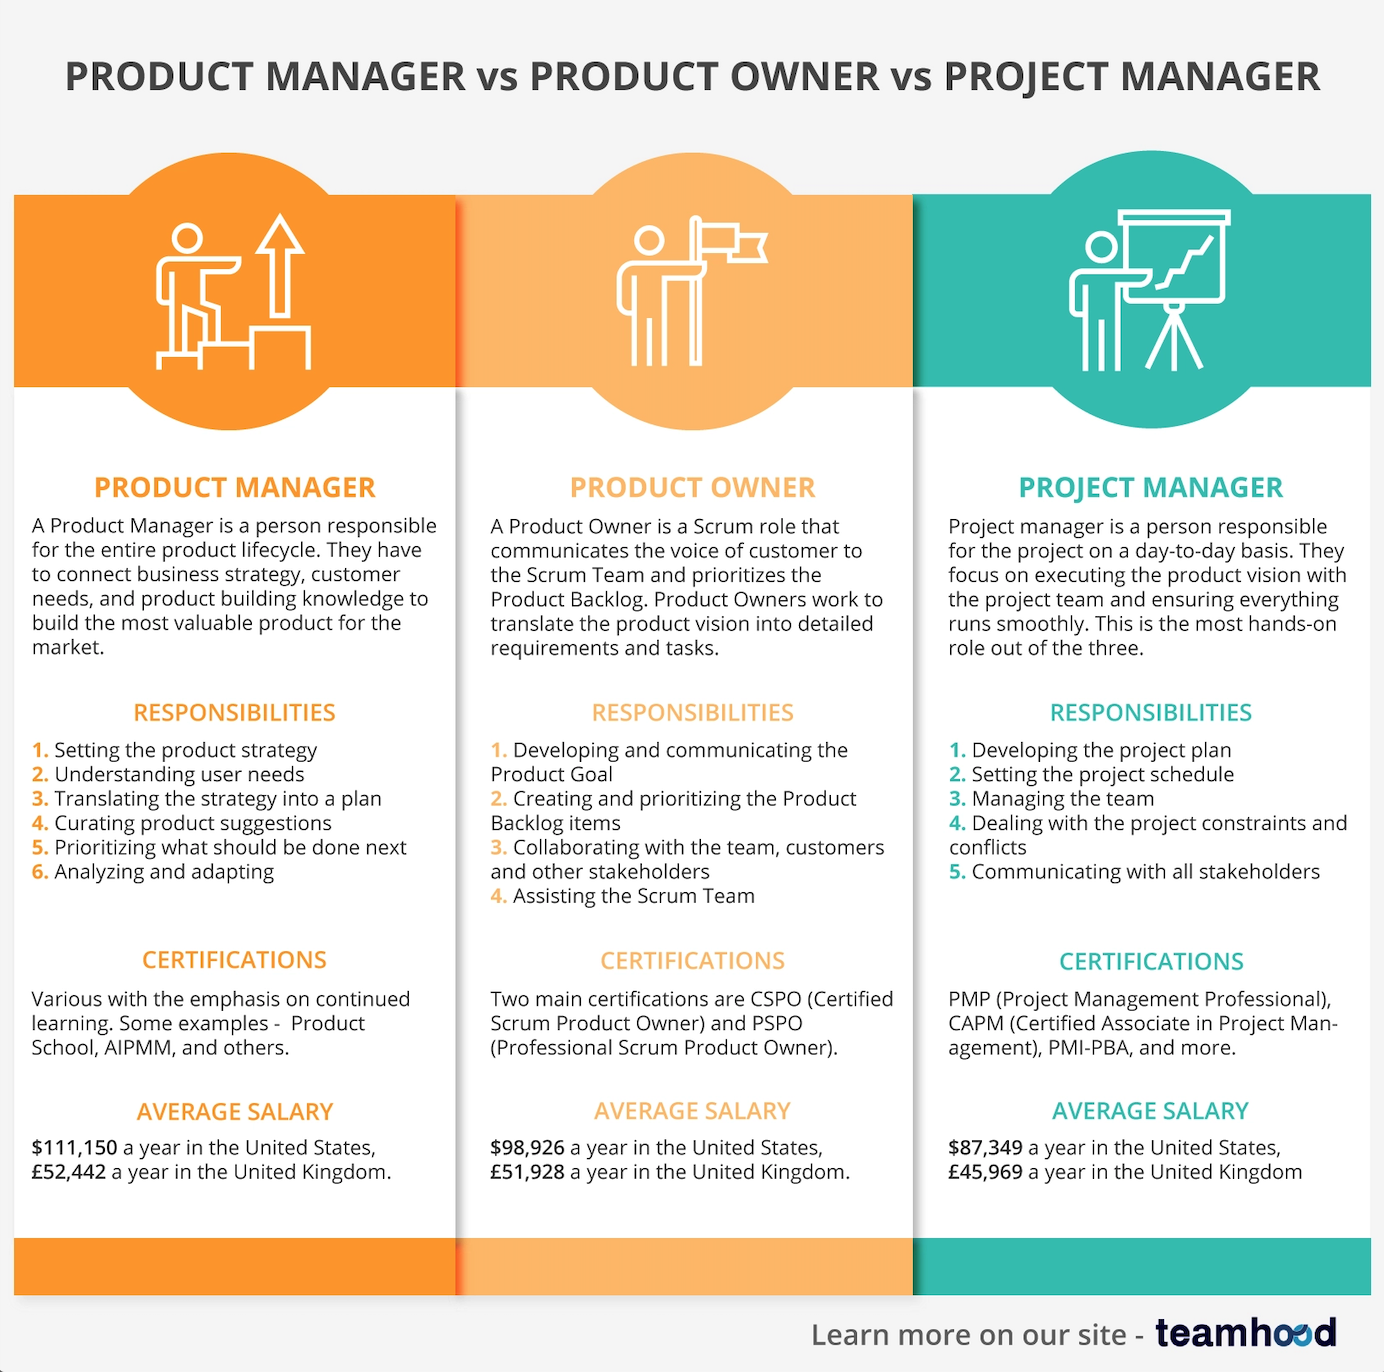 Product Manager vs. Product Owner vs. Project Manager